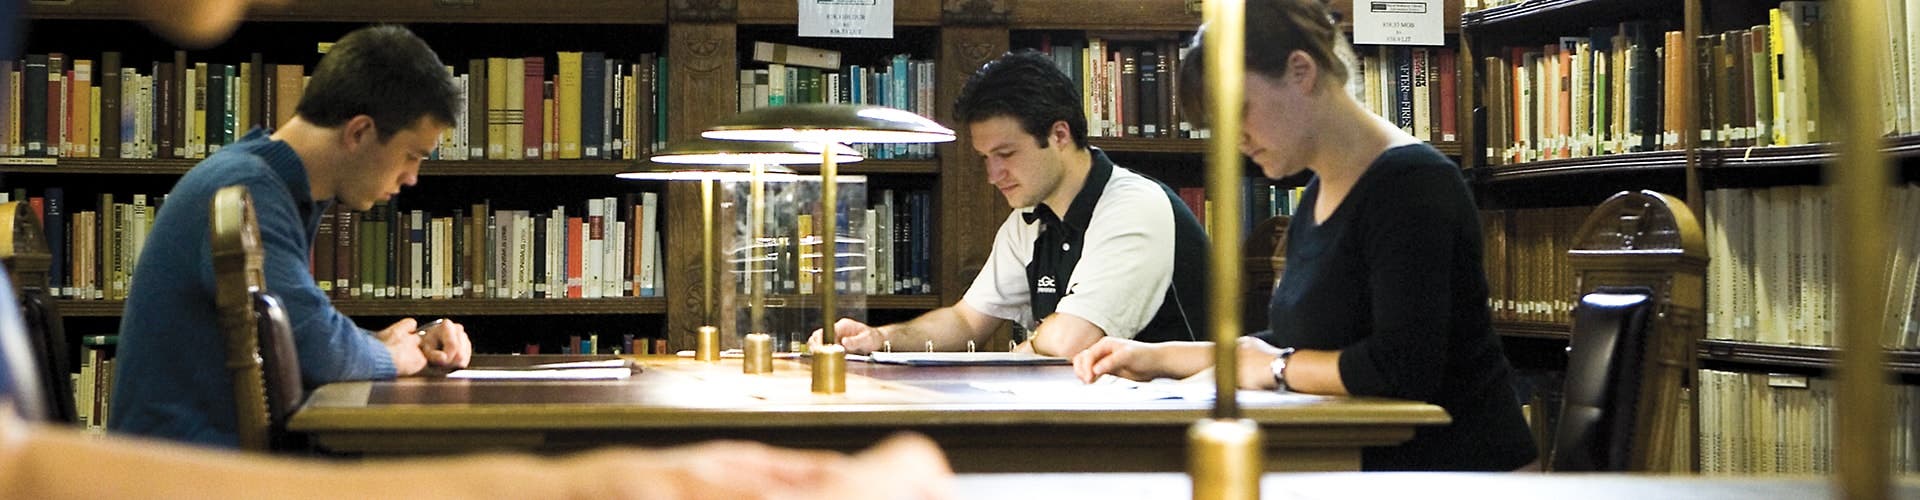 Students working in library